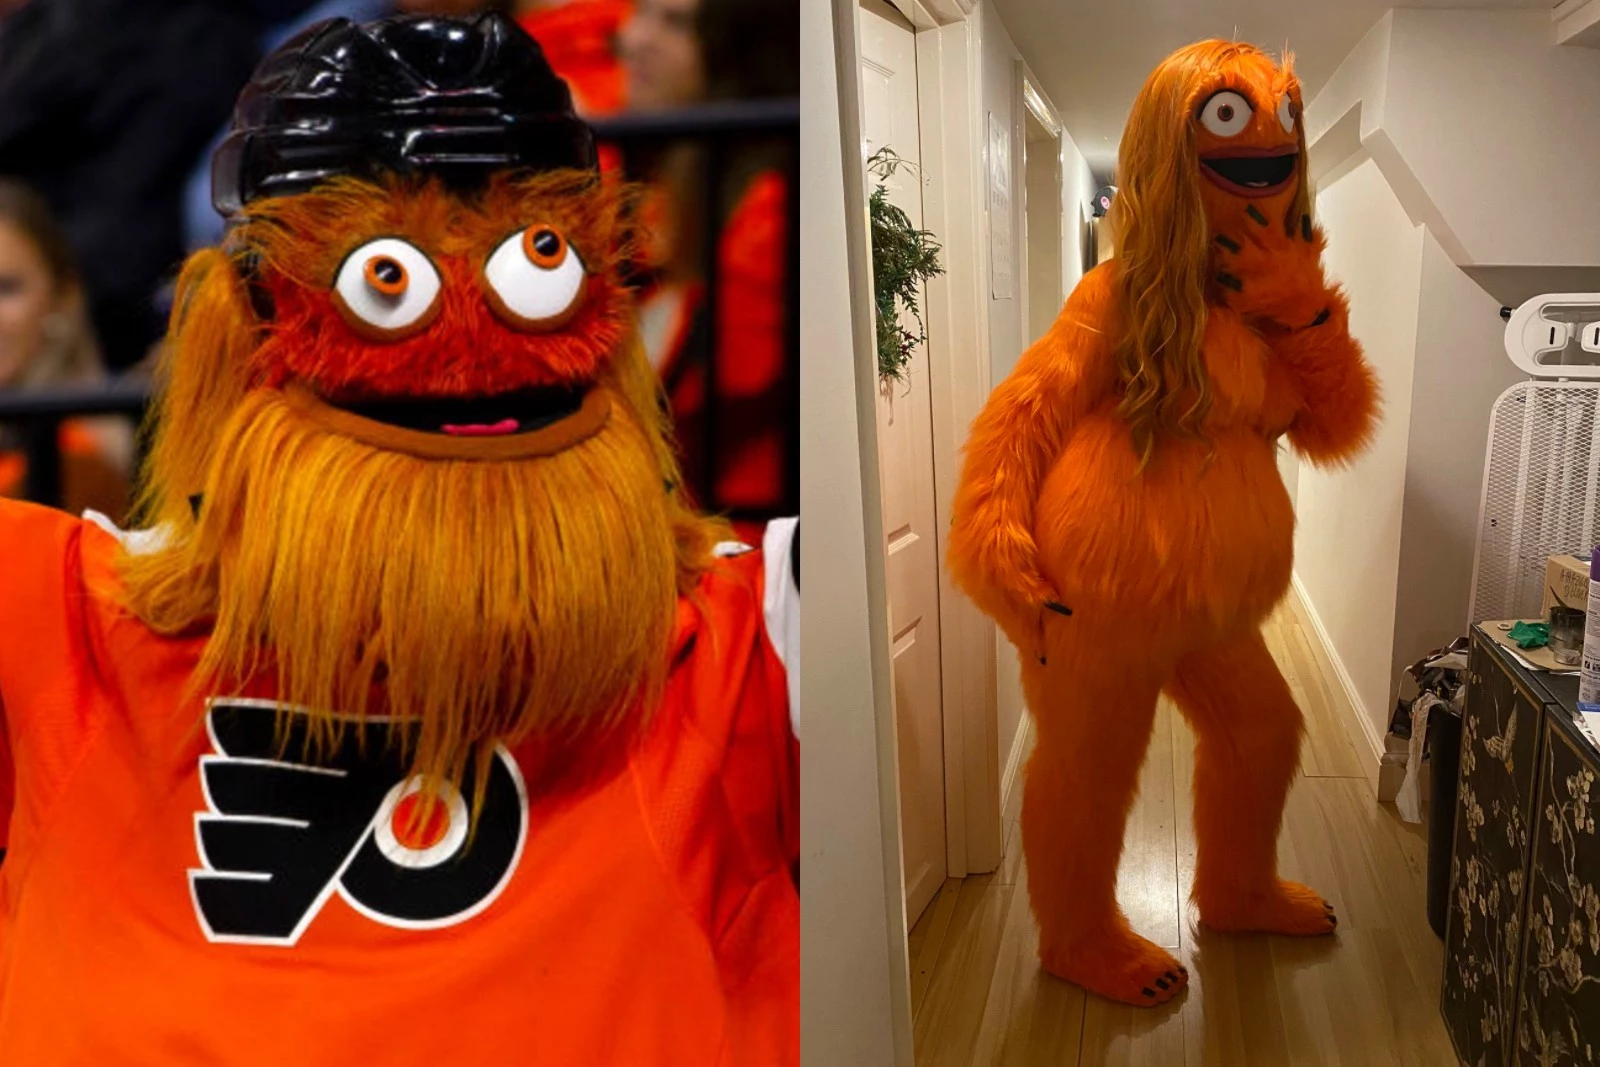 Philadelphia Flyers Mascot Gritty Becomes Wonder Woman in this